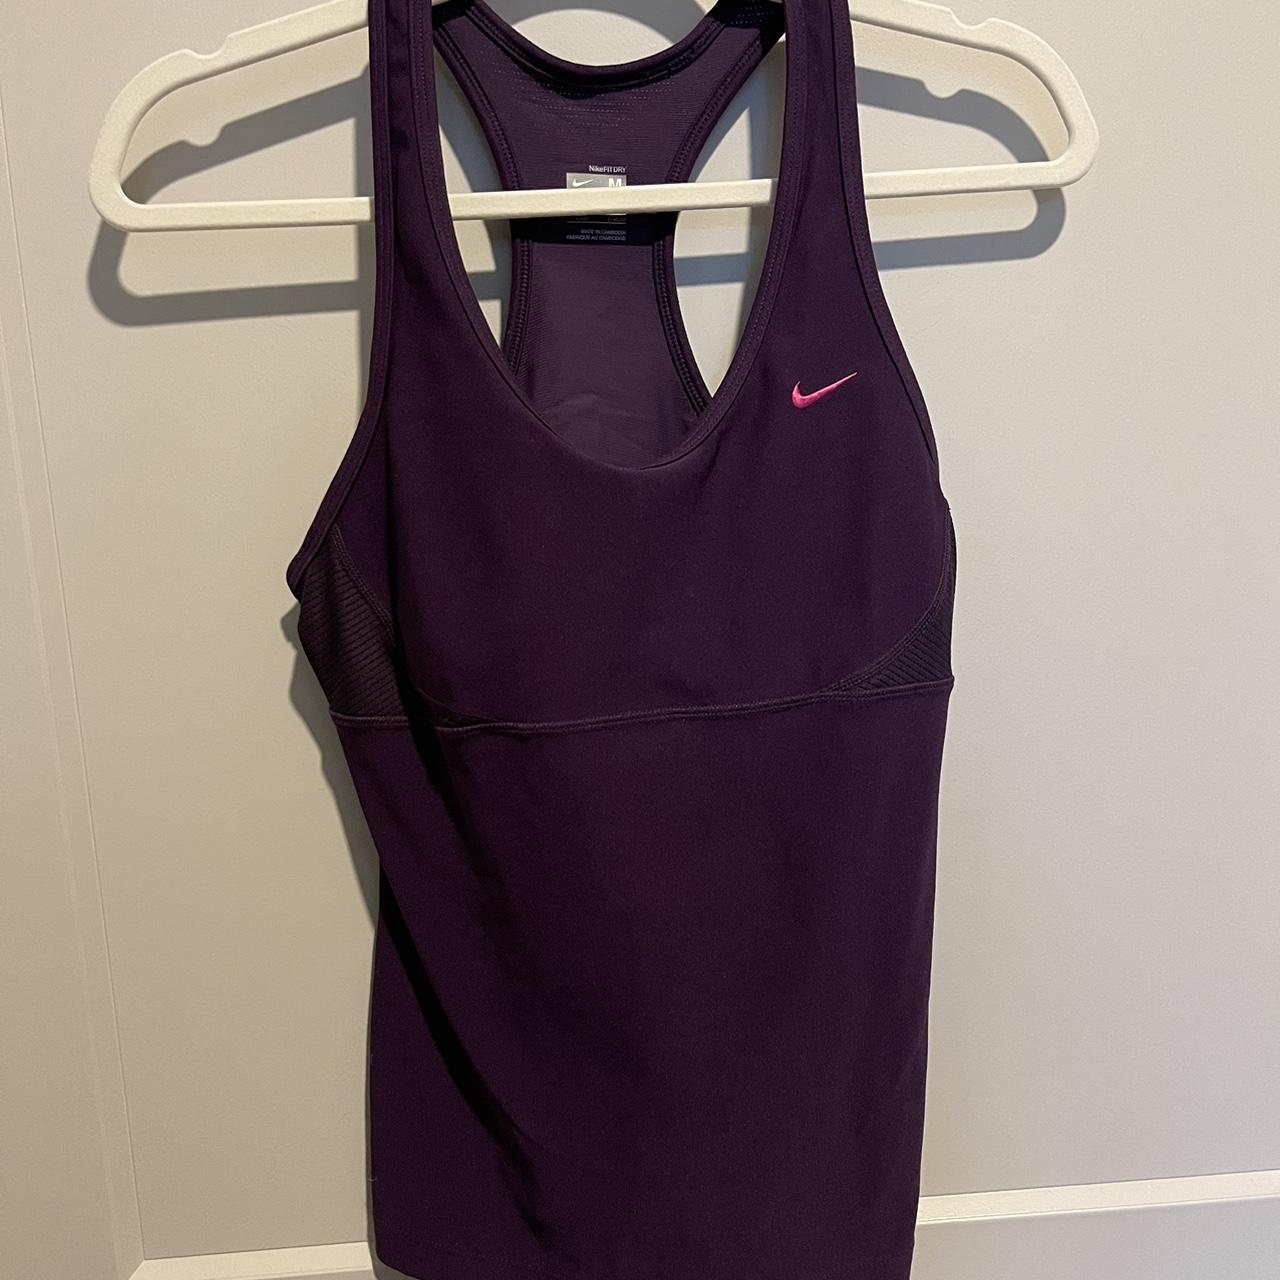 Nike Workout Tank with built in bra - Depop